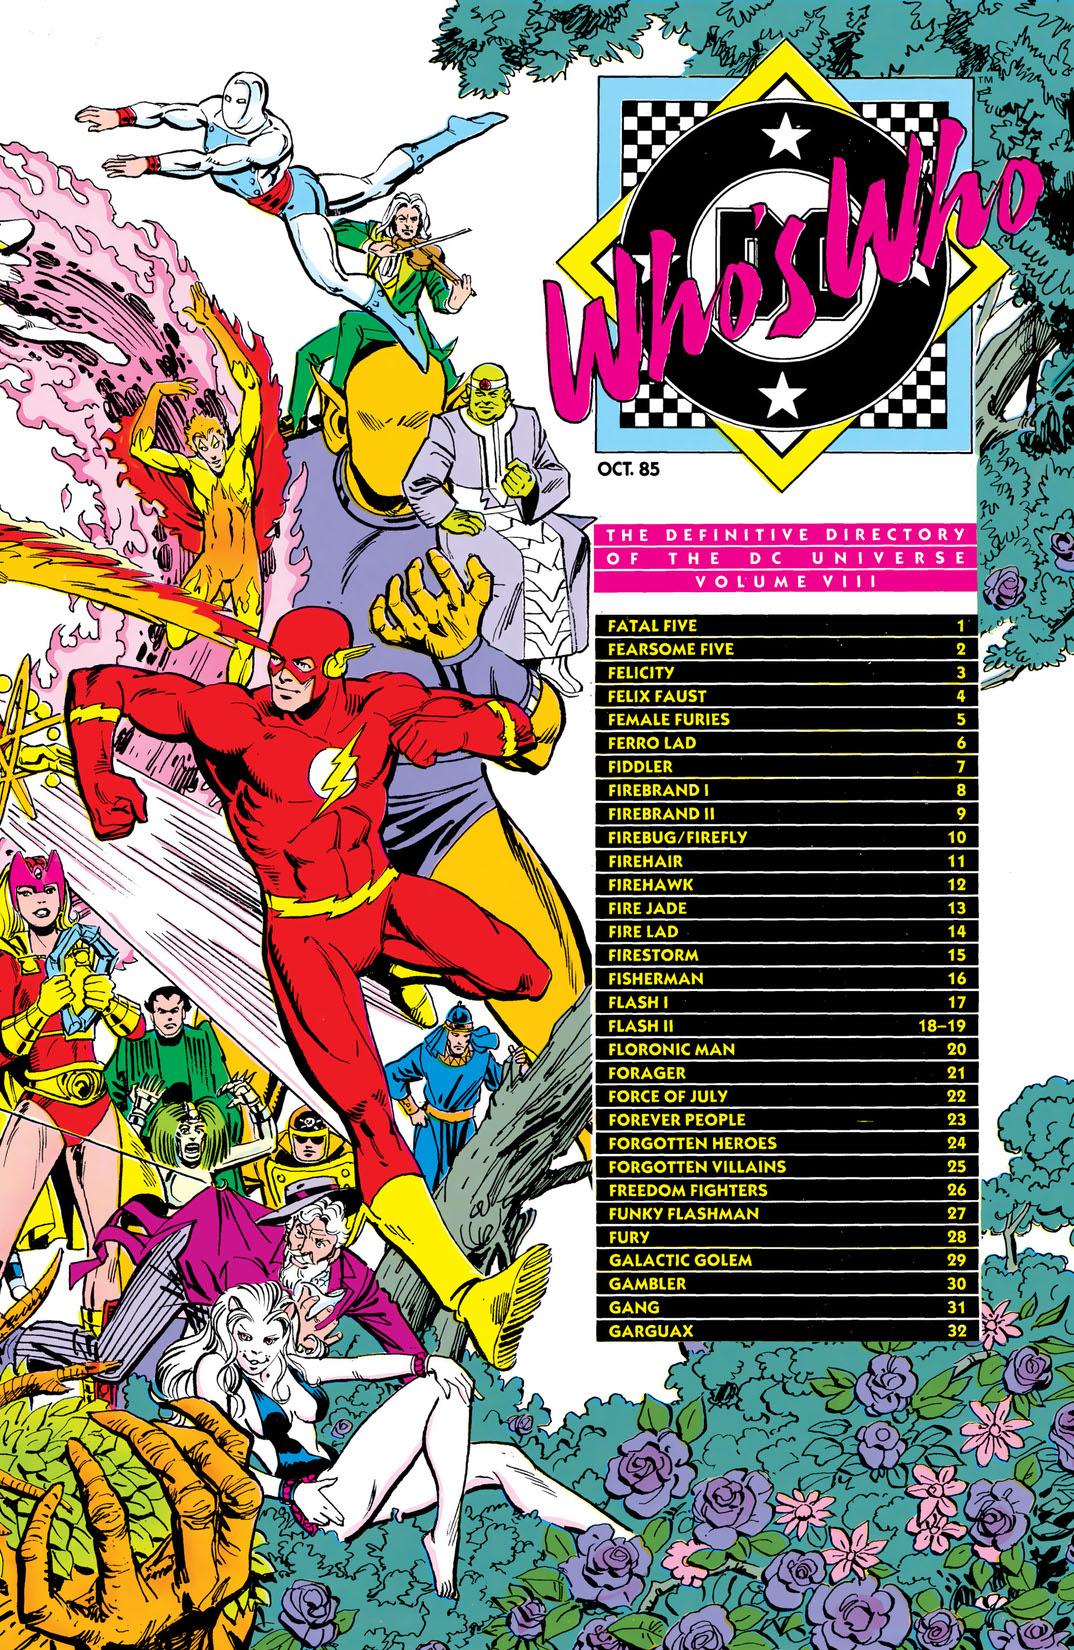 Who's Who: The Definitive Directory of the DC Universe #8 preview images